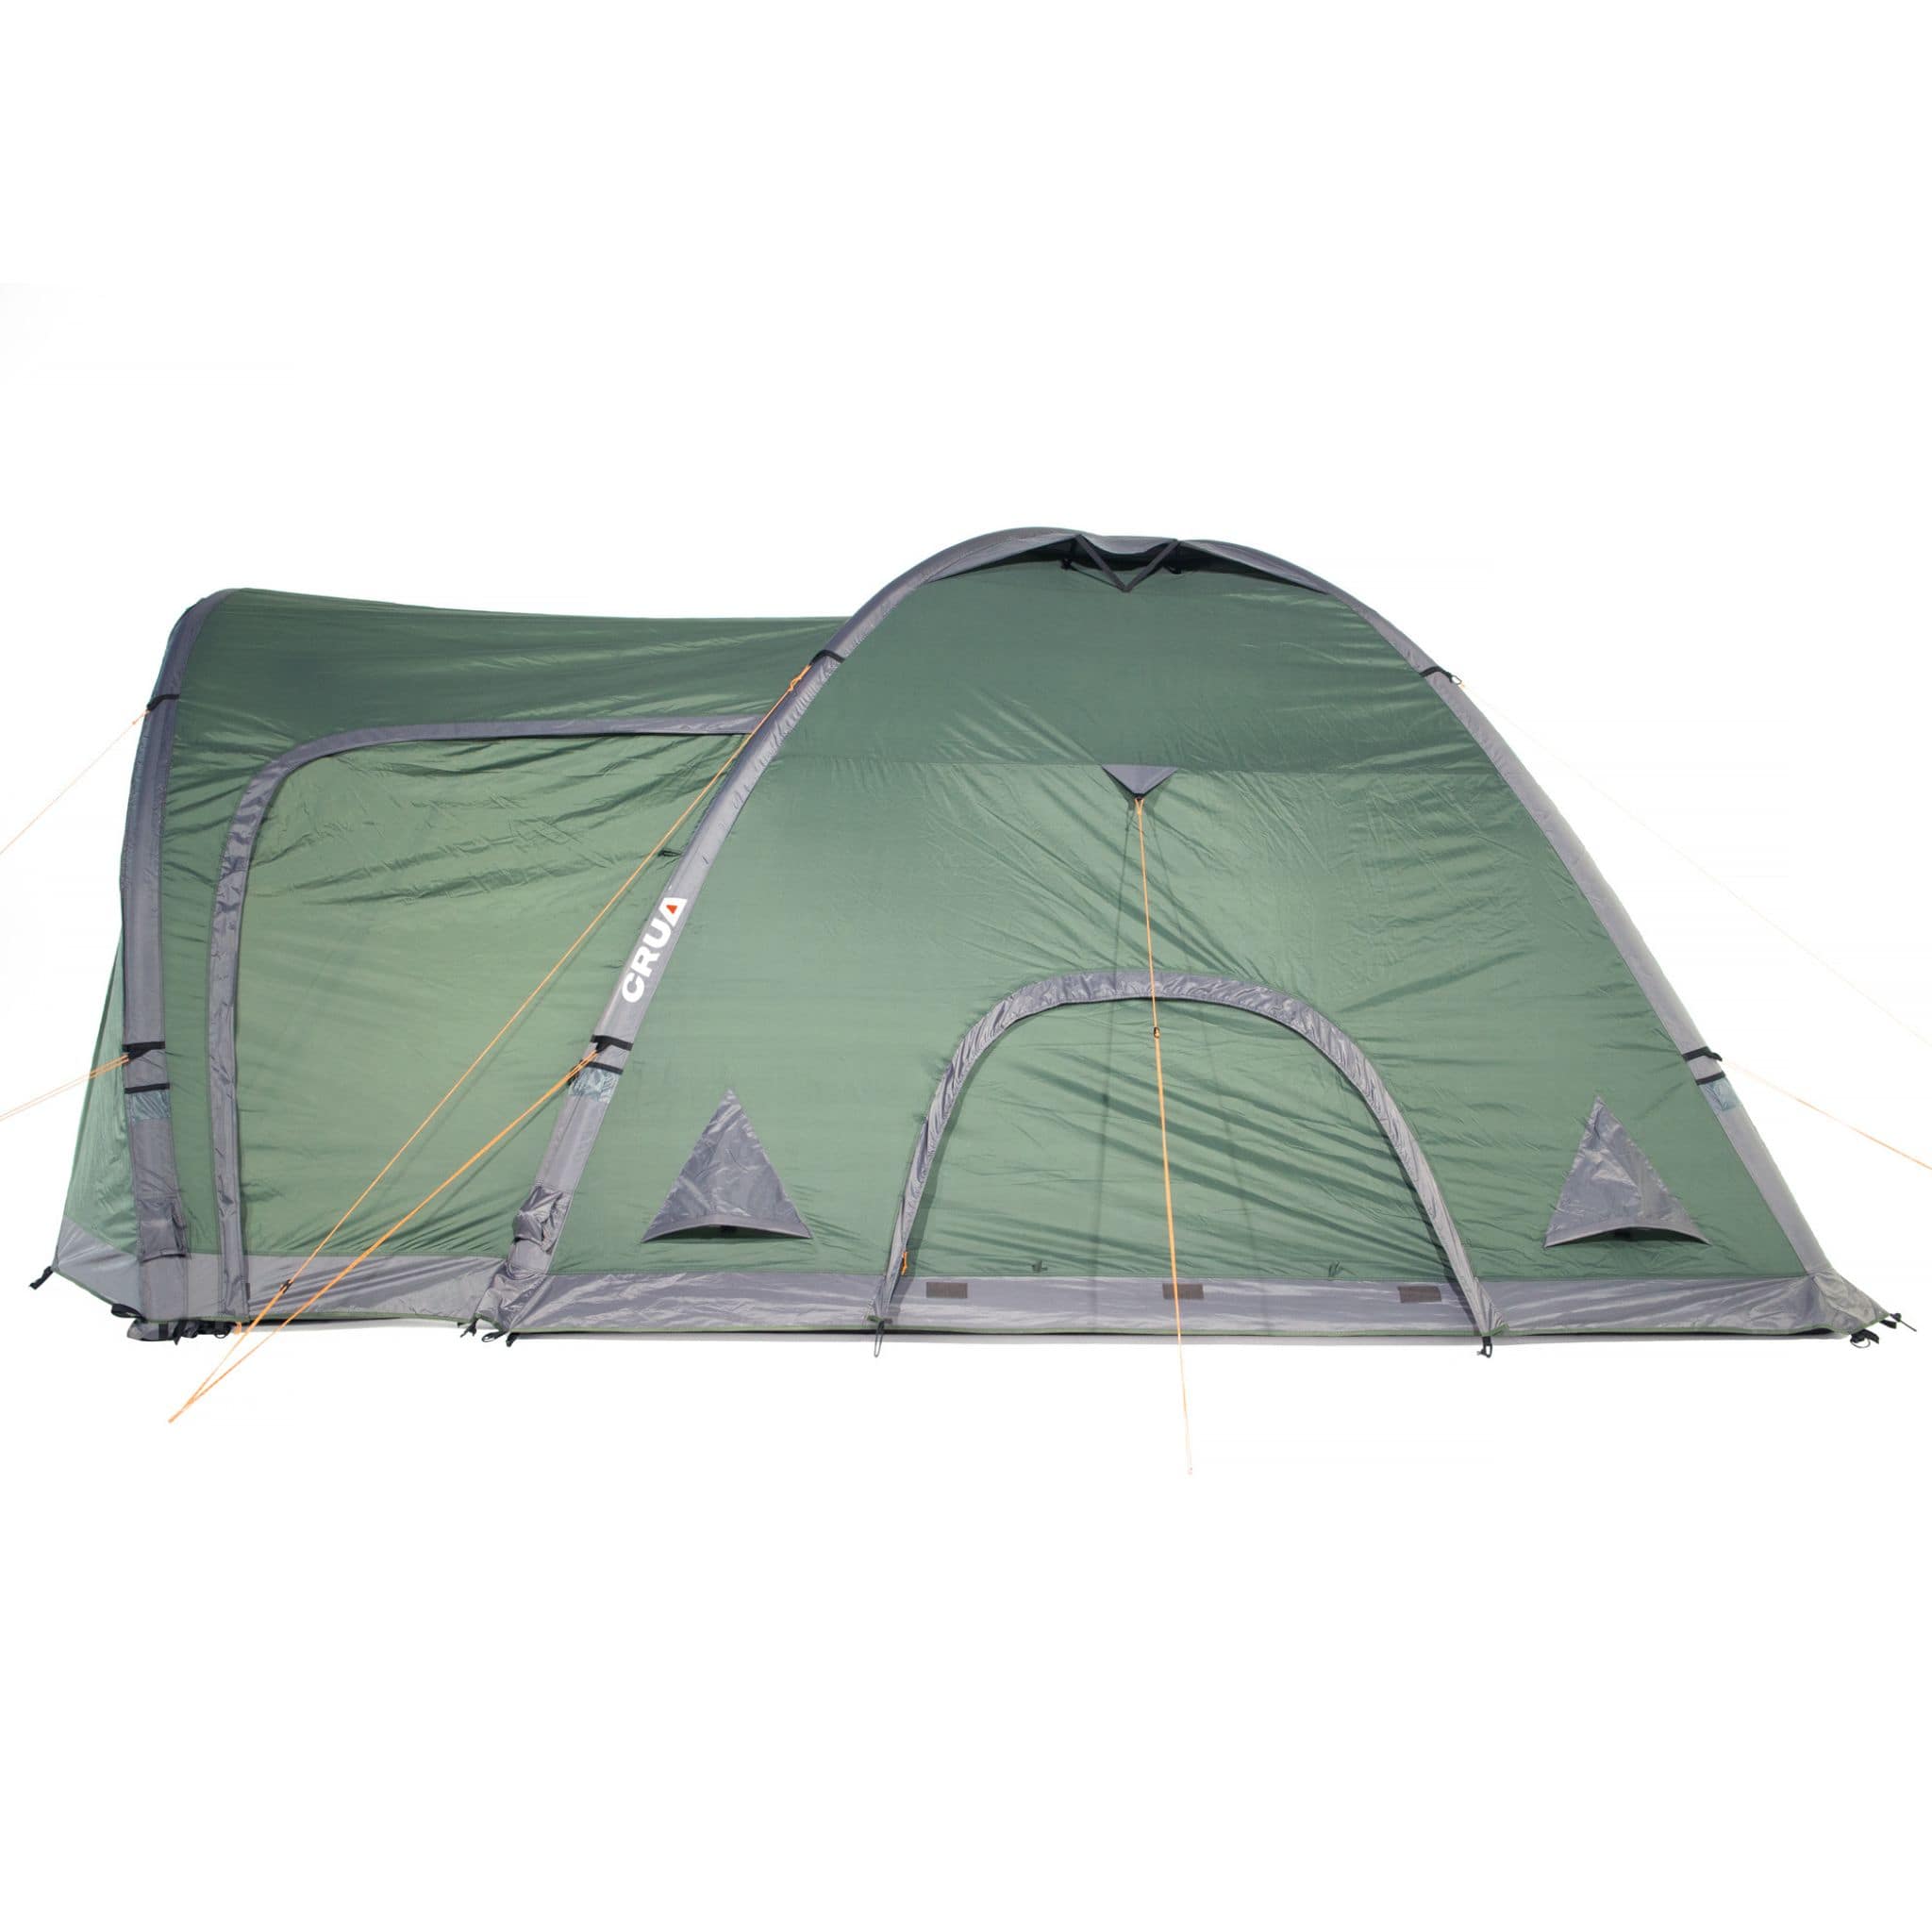 CORE| 6 PERSON CAMPING TENT - ALL WEATHER WATERPROOF SHELTER WITH ENHANCED COMFORT AND MODULAR CAMPING SYSTEM FOR ADDITIONAL TENTS